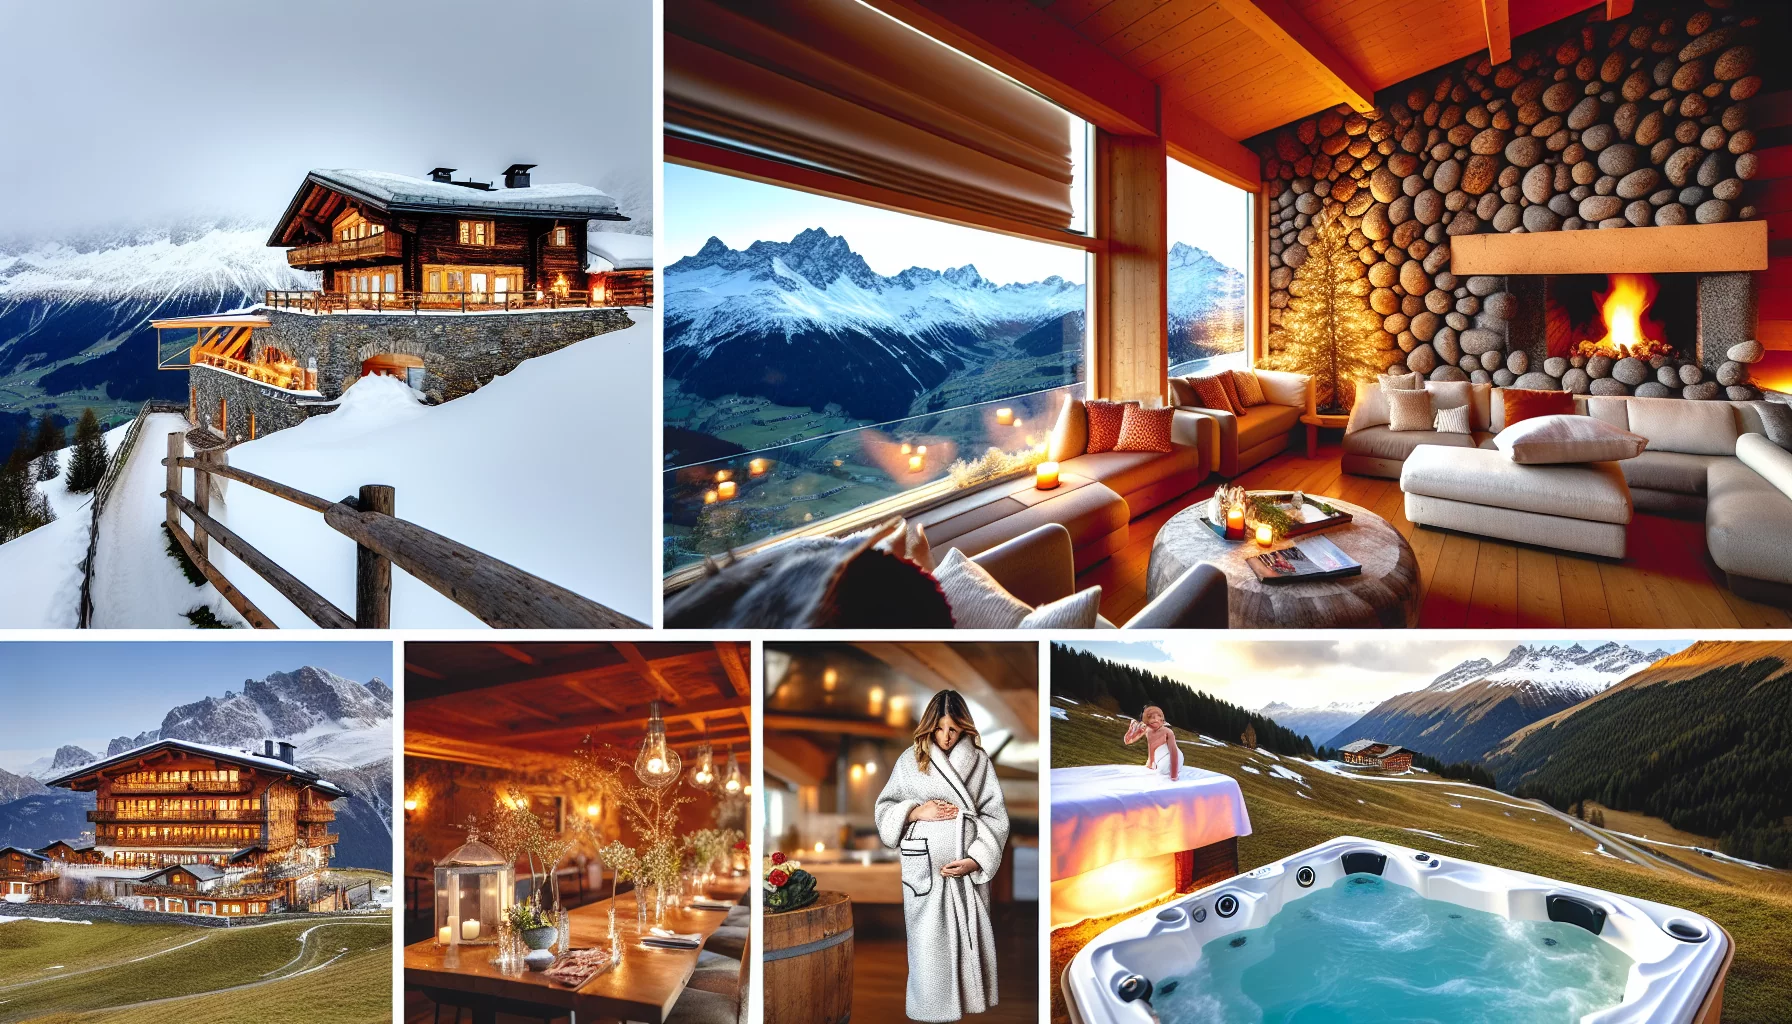 Experience ultimate pre-baby luxury with Adler Lodge Ritten's babymoon package in the Italian Alps